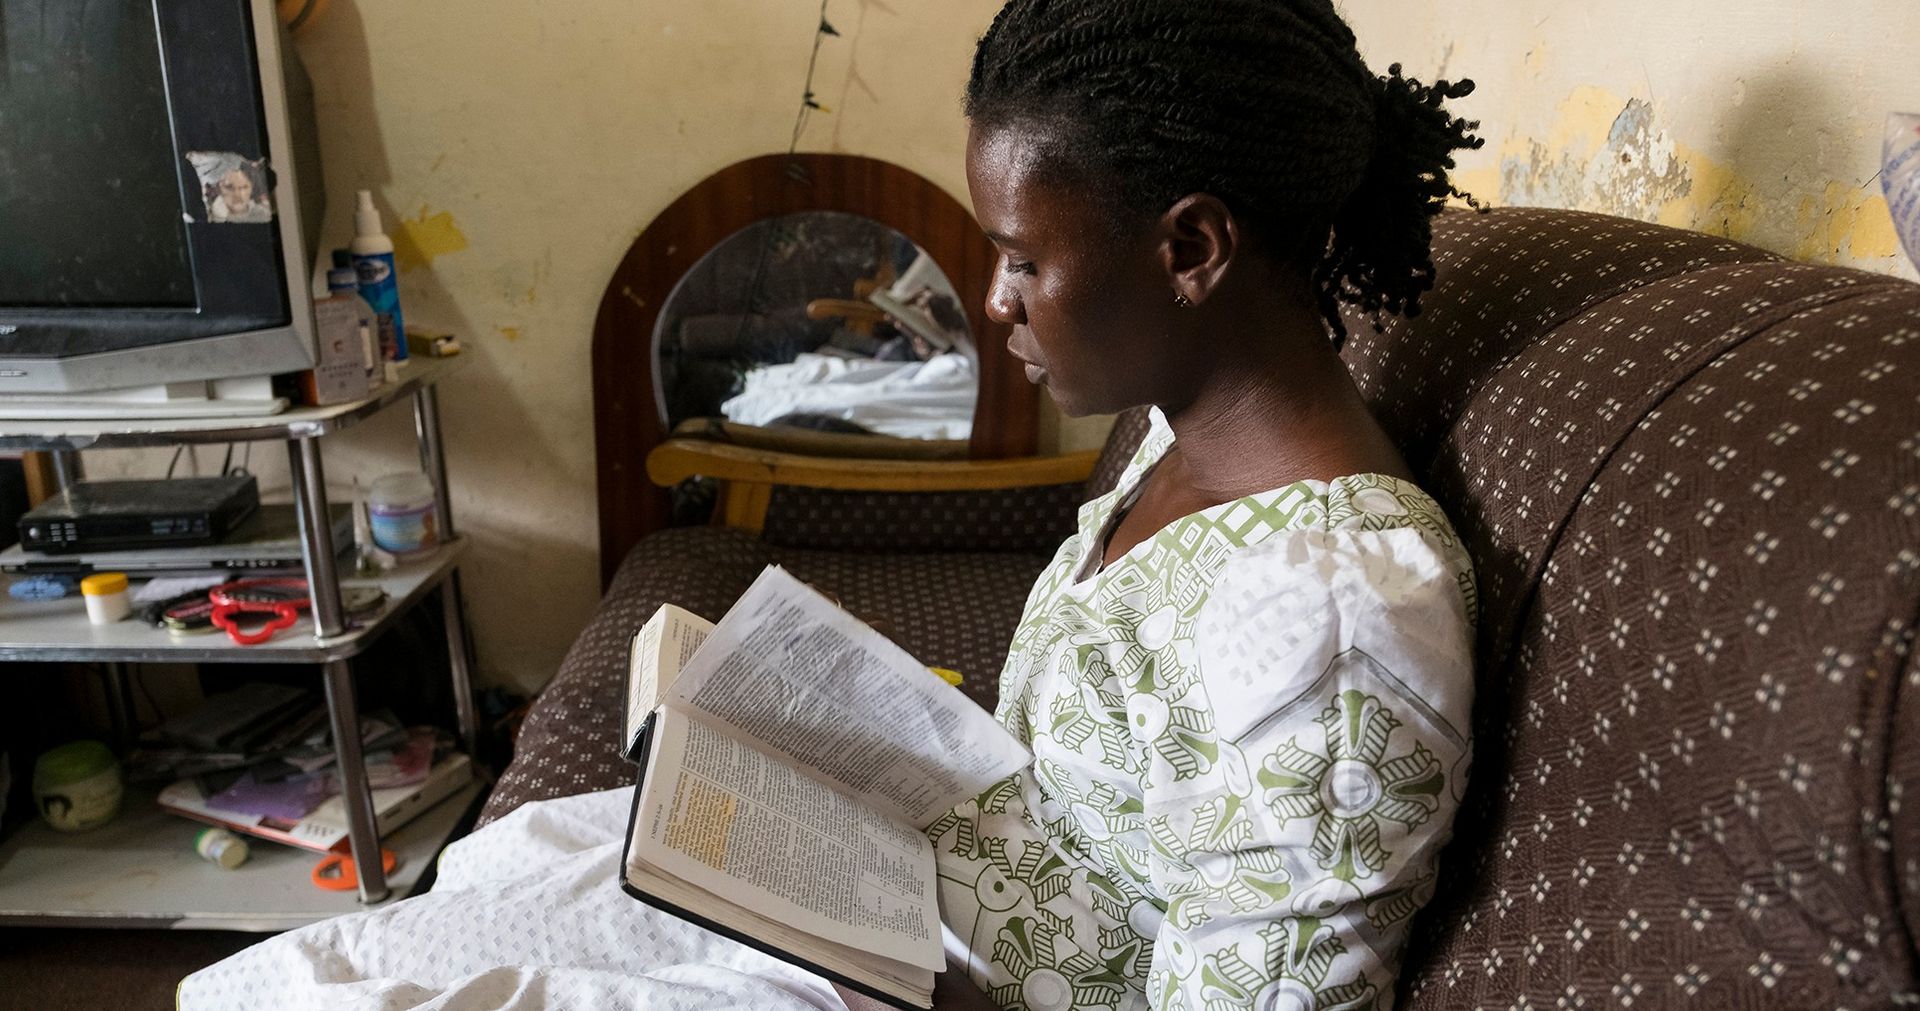 A Ghanaian woman sits on her couch reading the scriptures.